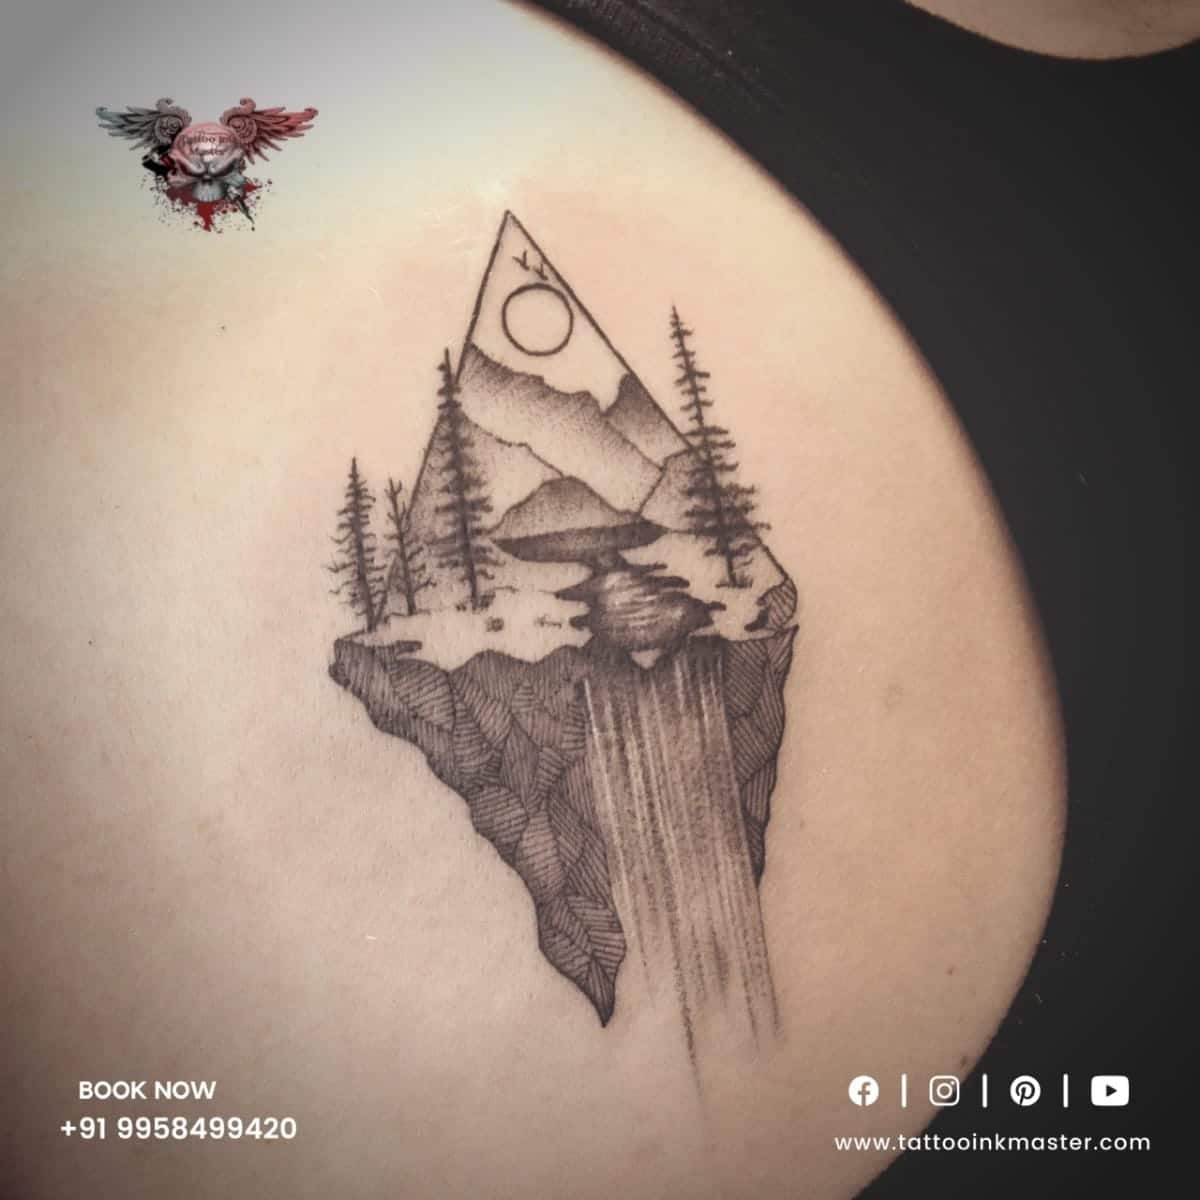 40 Stunning Nature-Inspired Tattoo Ideas For You To Get If You Love The  Outdoors & Traveling | Tree tattoo small, Tree tattoo, Nature tattoos